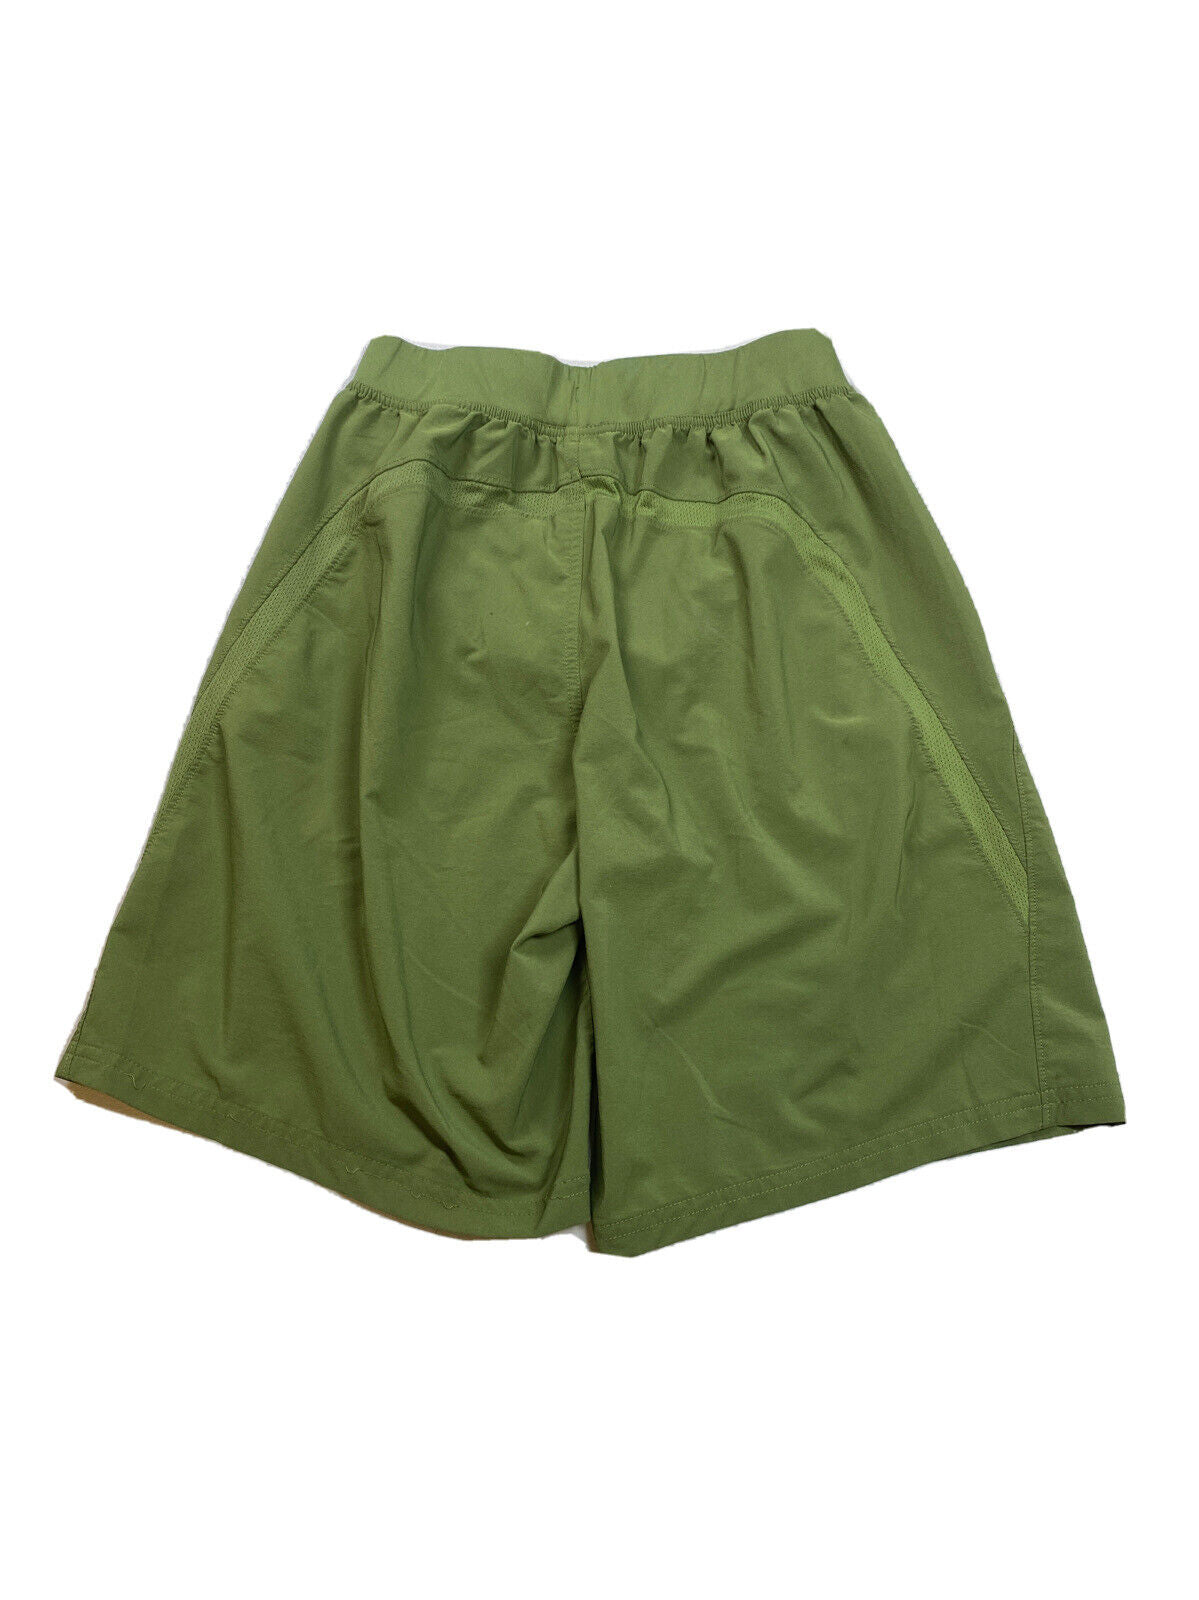 Under Armour Men's Green Lined Fitted HeatGear Athletic Shorts - S